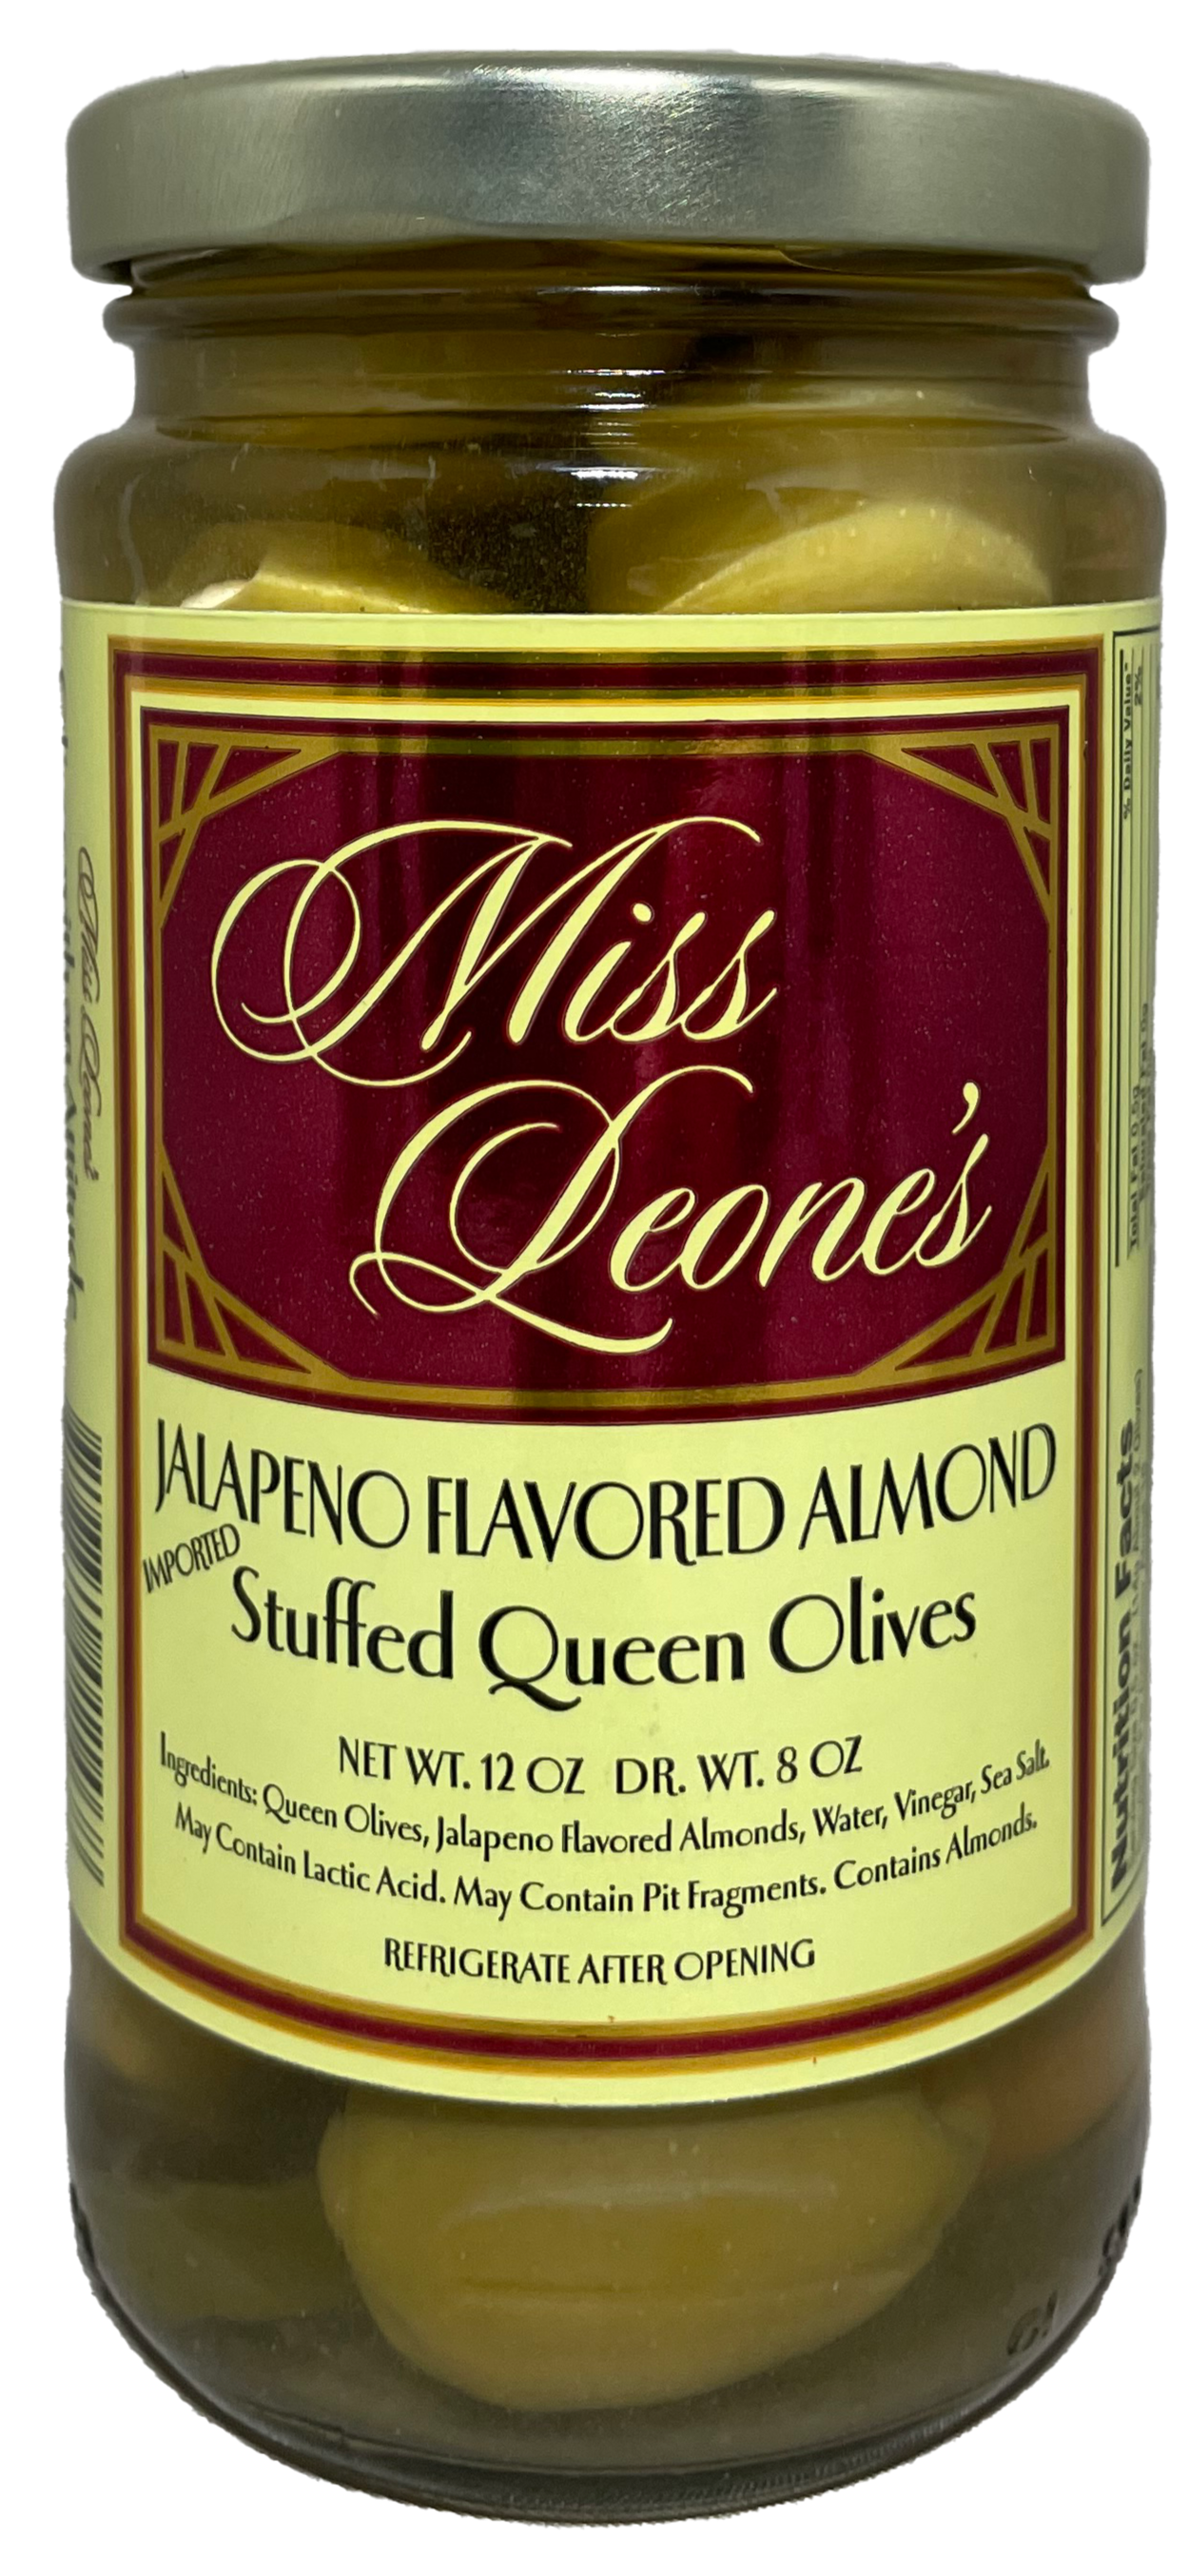 Jalapeno Pepper Flavored Almond Stuffed Queen Olives *NEW LOWER PRICE*